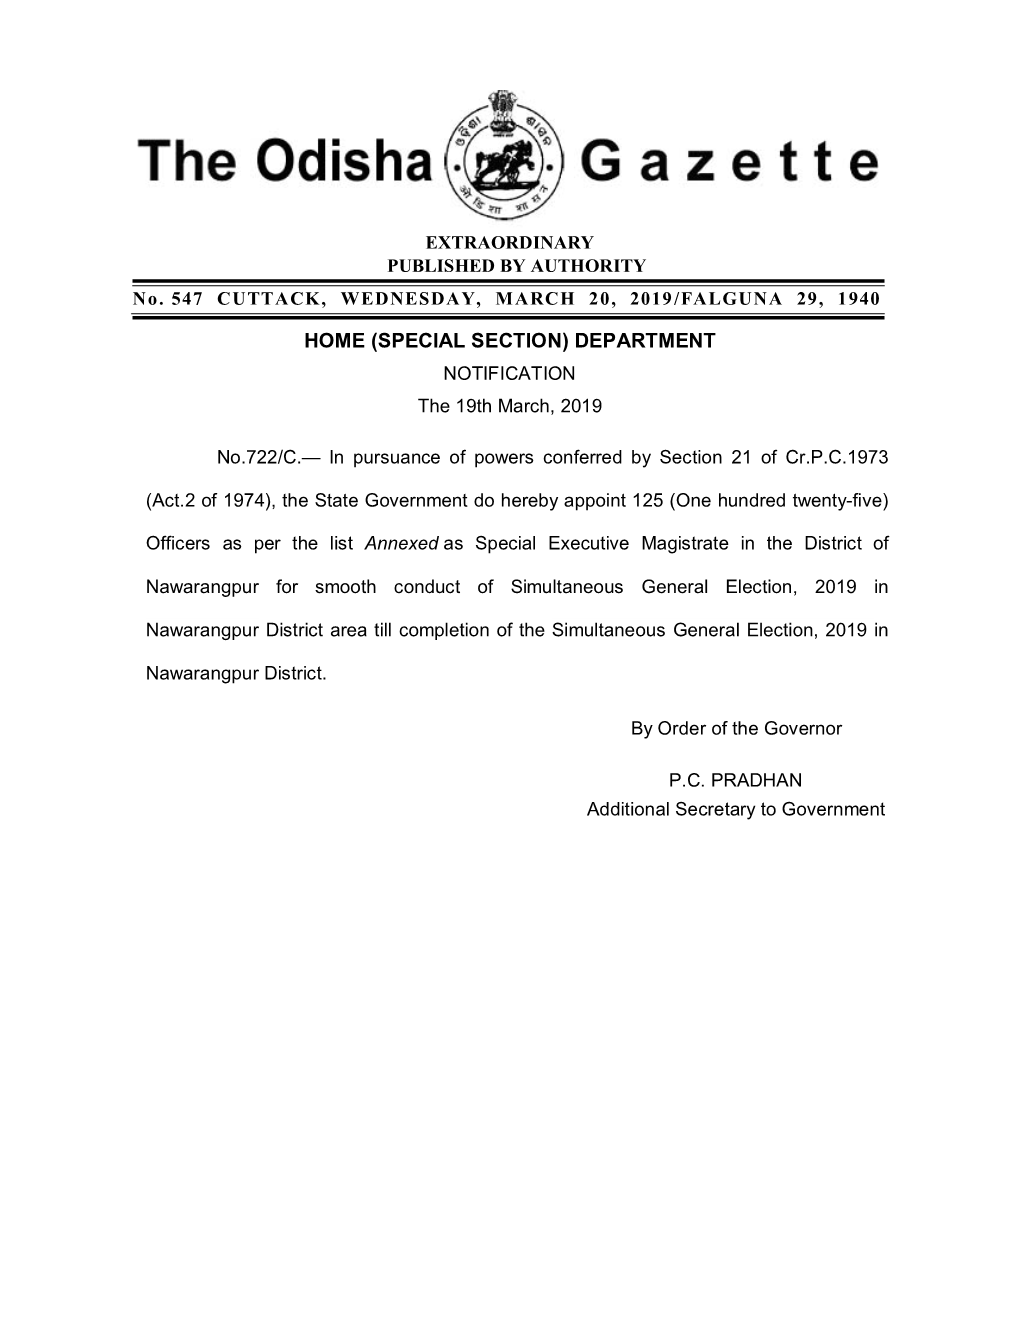 HOME (SPECIAL SECTION) DEPARTMENT NOTIFICATION the 19Th March, 2019